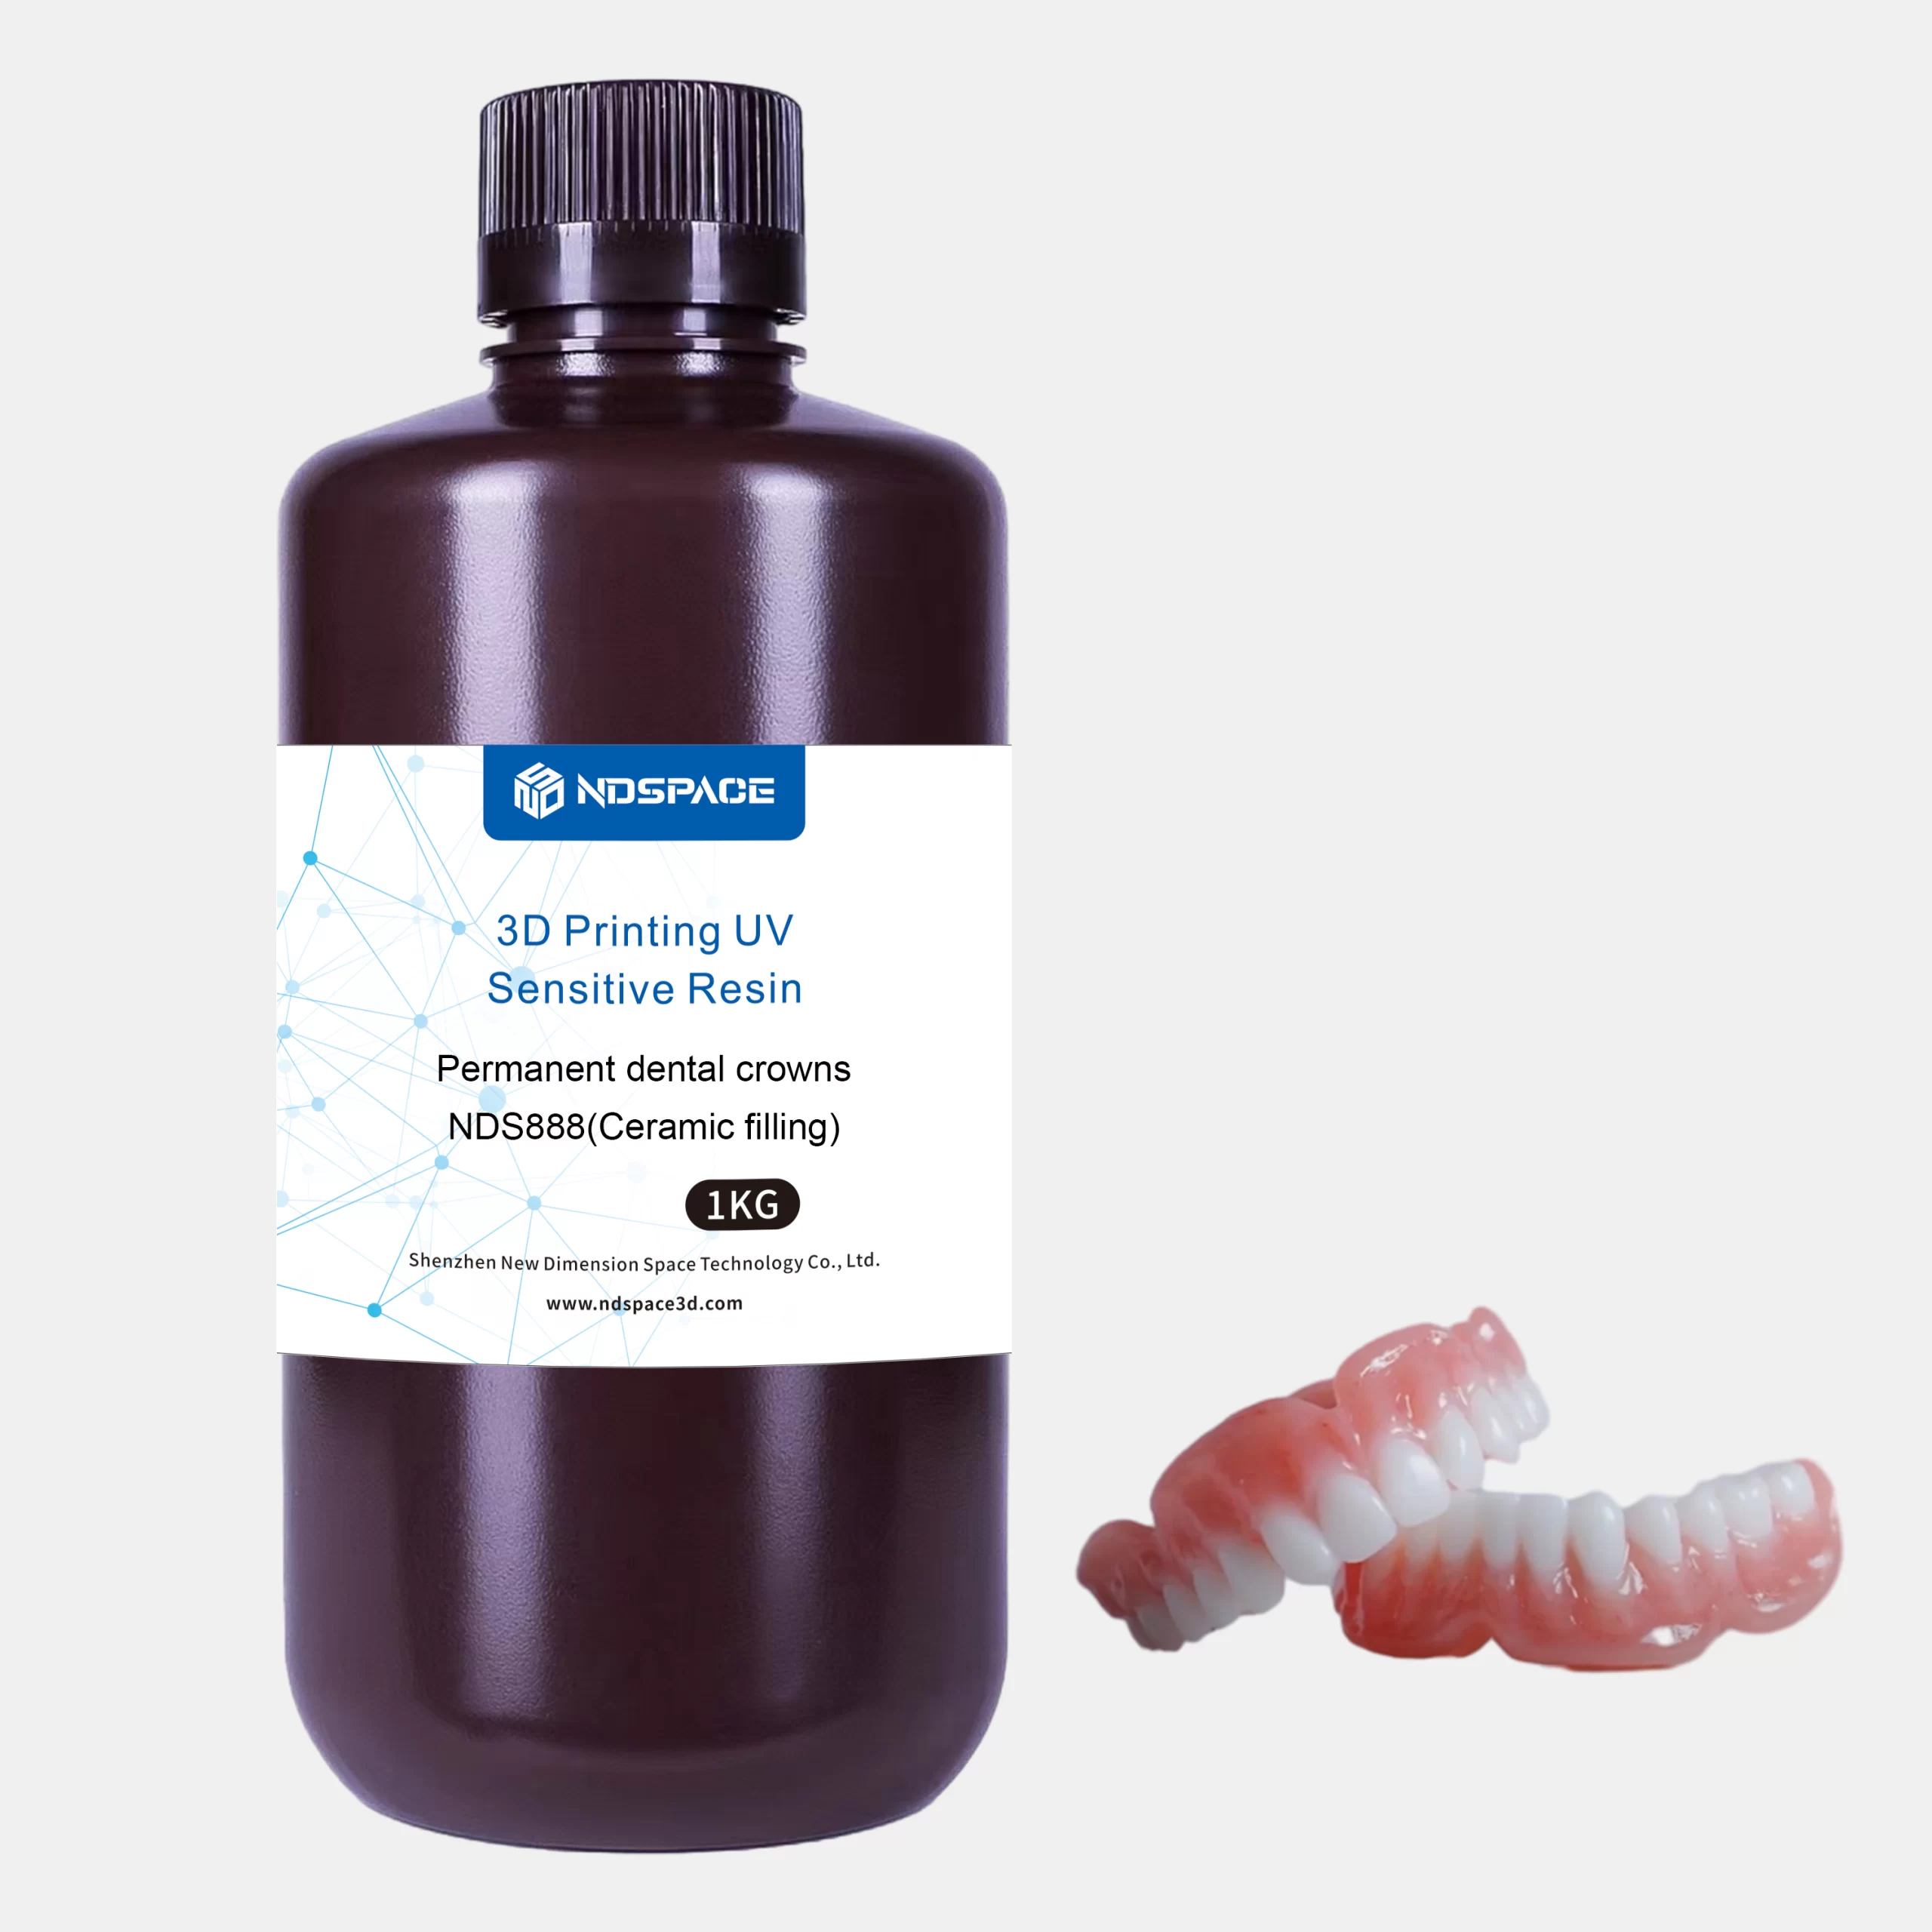 NDSpace3D Permanent dental crowns-NDS888 (Ceramic filling)